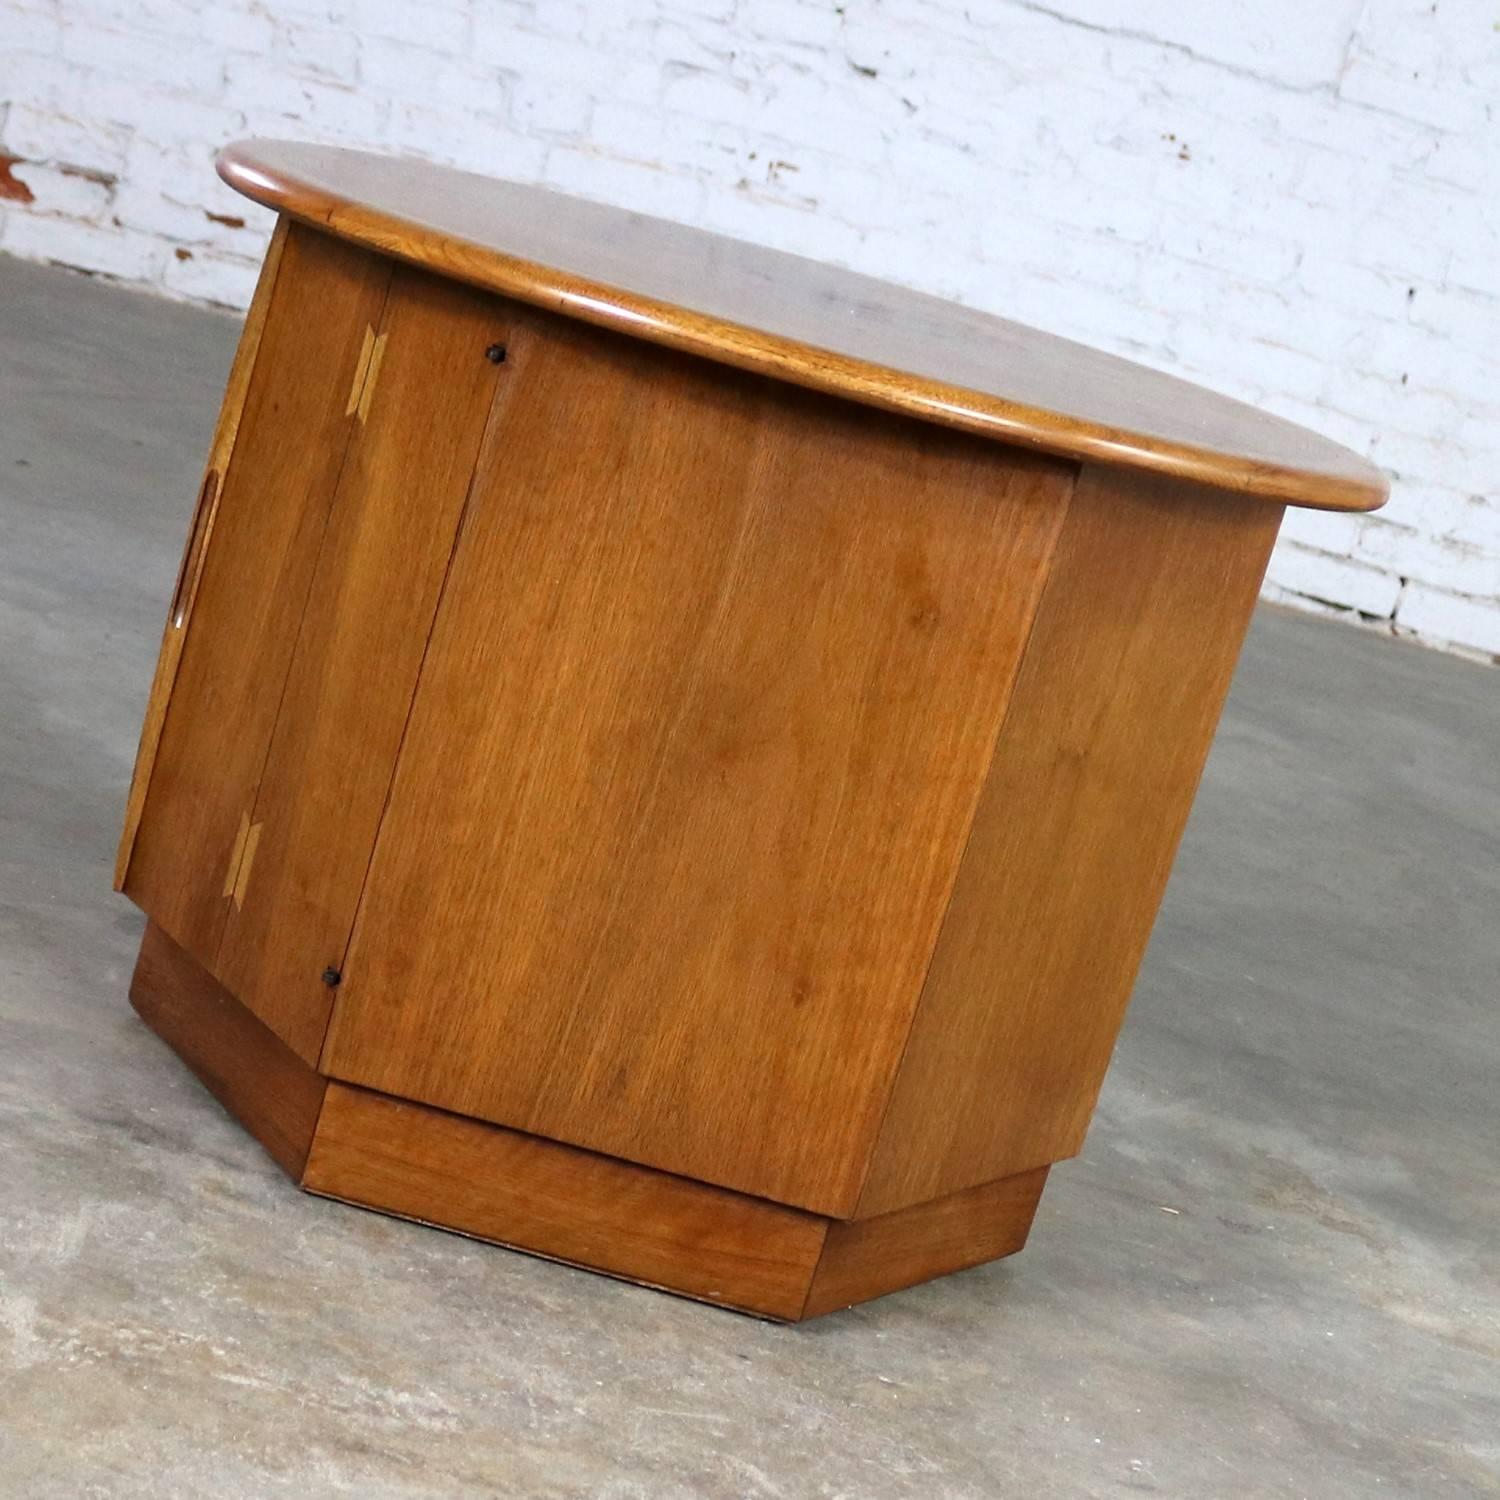 Fruitwood Lane Acclaim Dovetail End Table Round Top and Hexagon Cabinet Base by Andre Bus